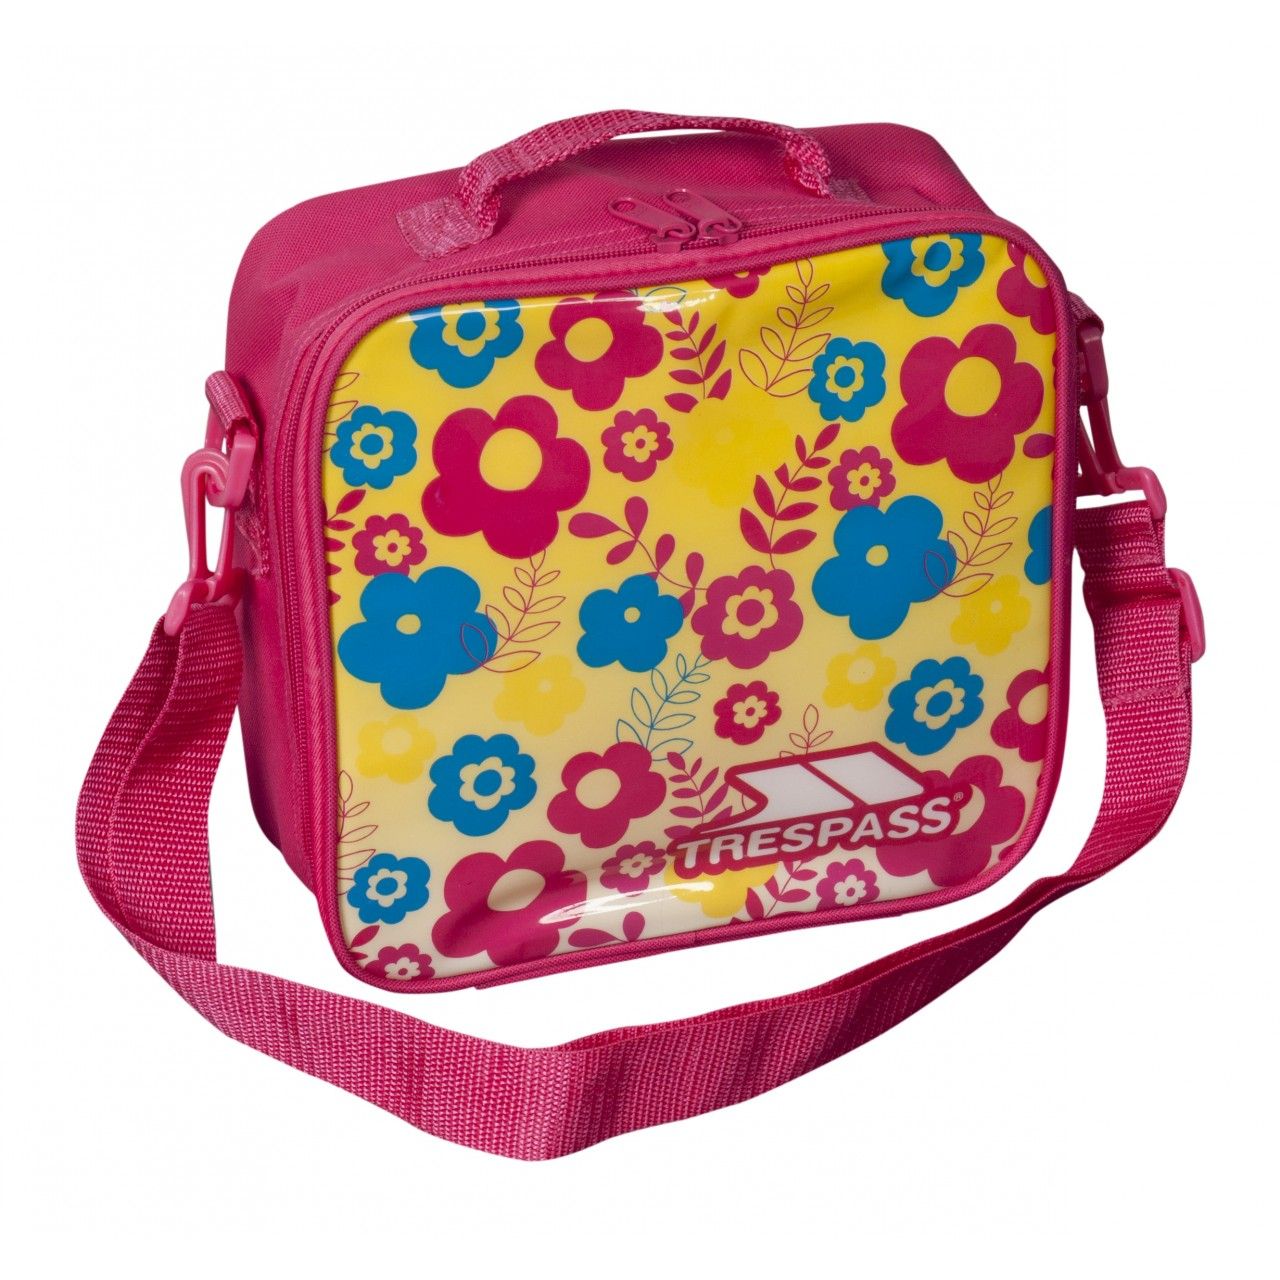 Material (outer): 100% 300D polyester, (inner): 100% PEVA foam insulation. Kids lunch box. Clip off carry strap. Size: 230mm x 230mm x 90mm.